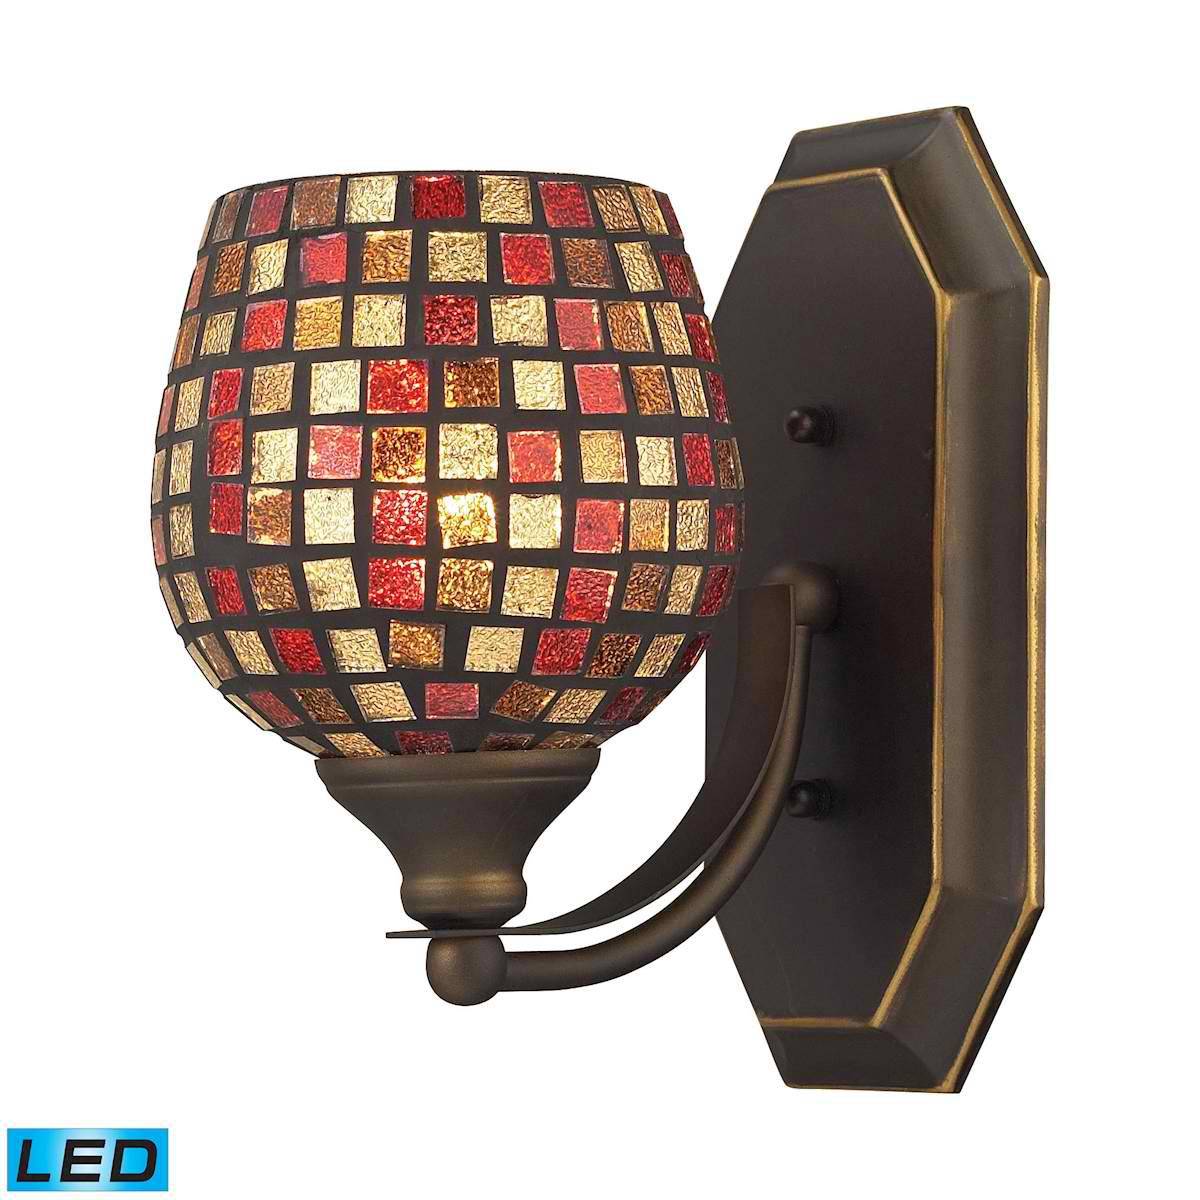 1 Light Vanity in Aged Bronze and Multi Mosaic Glass - LED Offering Up To 800 Lumens (60 Watt Equivalent)